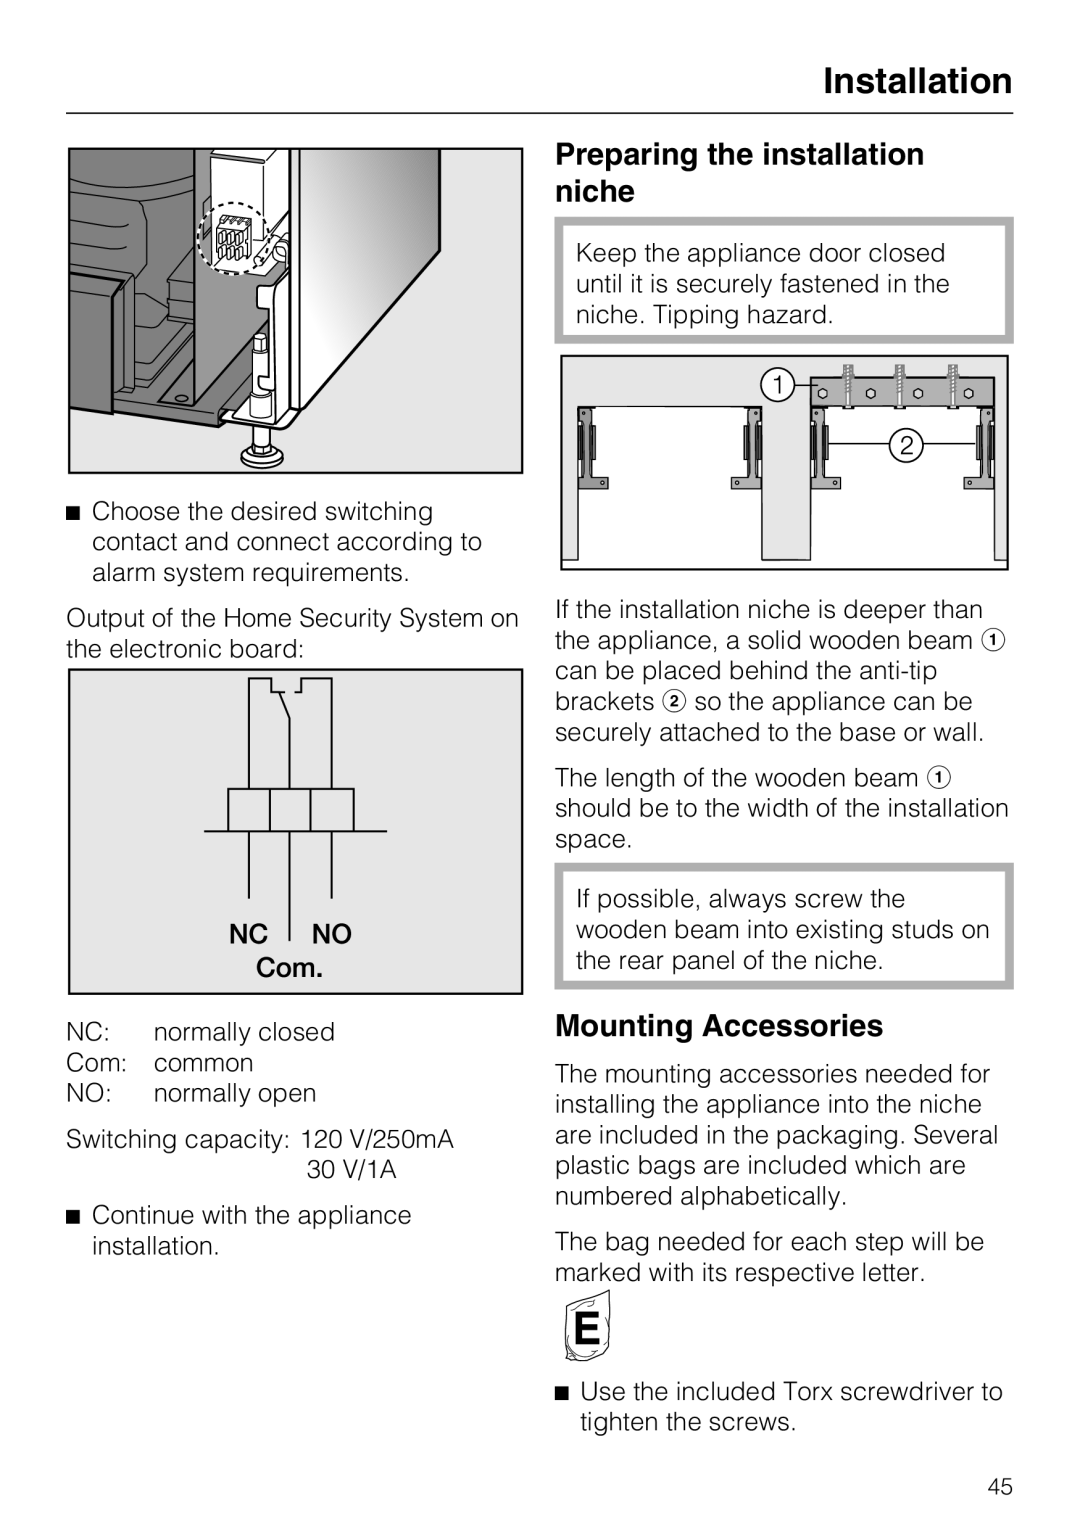 Miele KWT1601SF, KWT1611SF installation instructions Preparing the installation niche, Mounting Accessories, Installation 